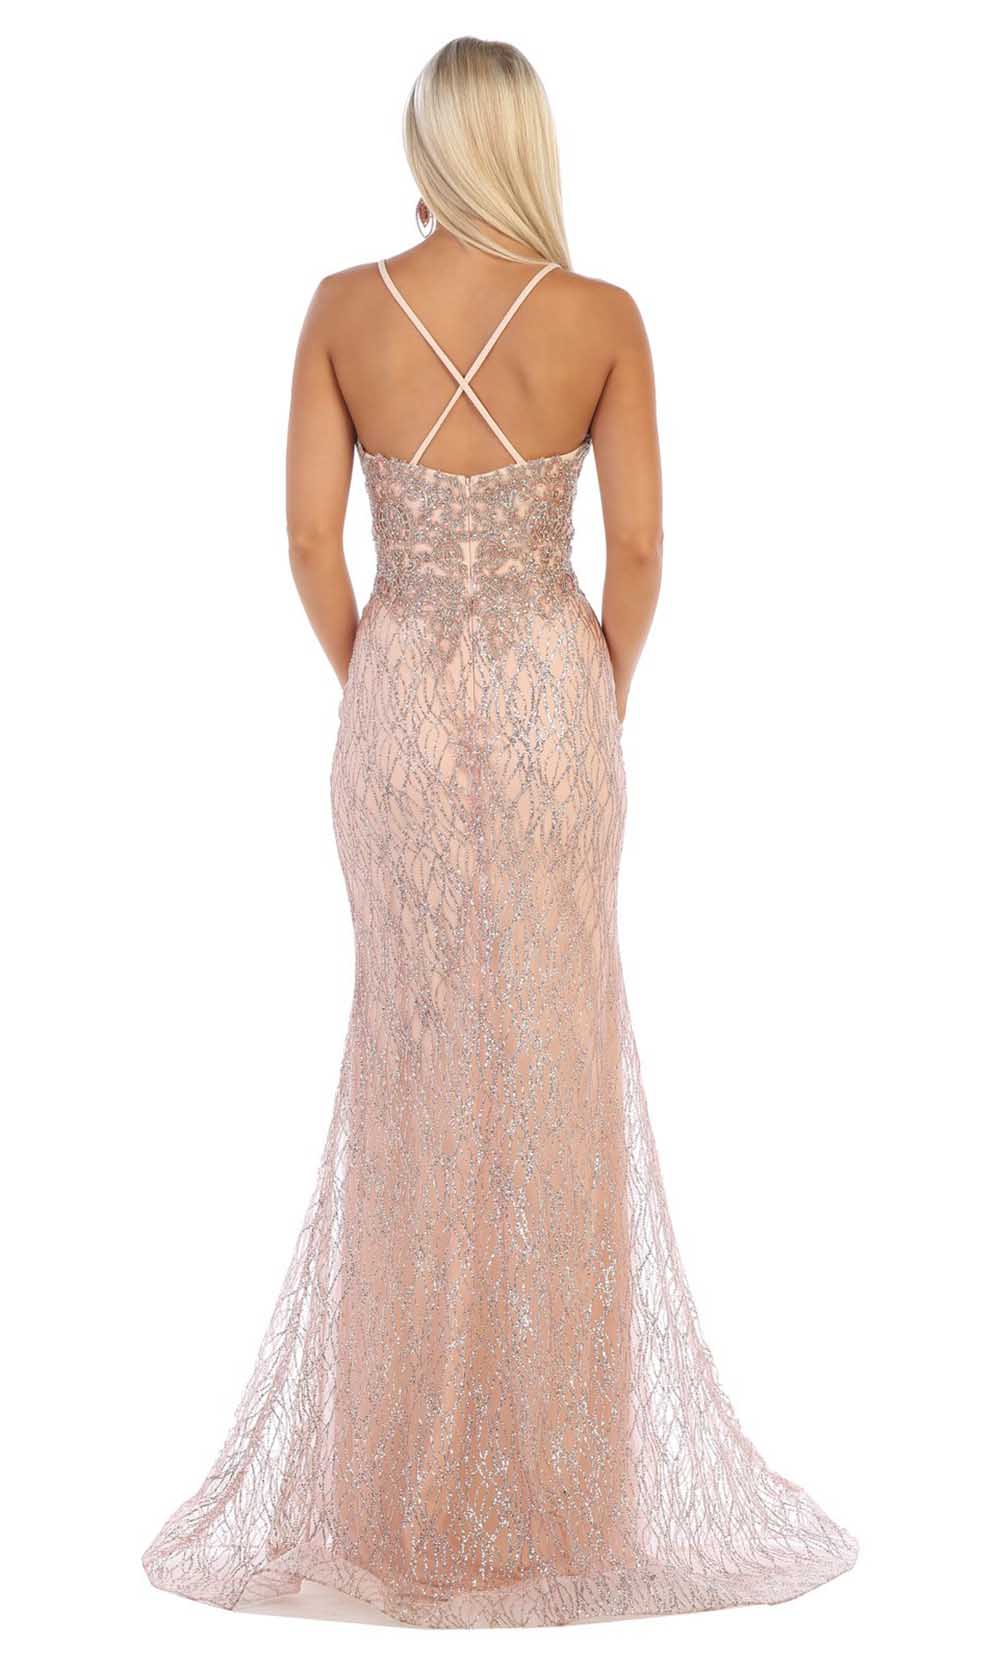 May Queen - RQ7683 Embellished Deep V-Neck Gown In Pink and Gold